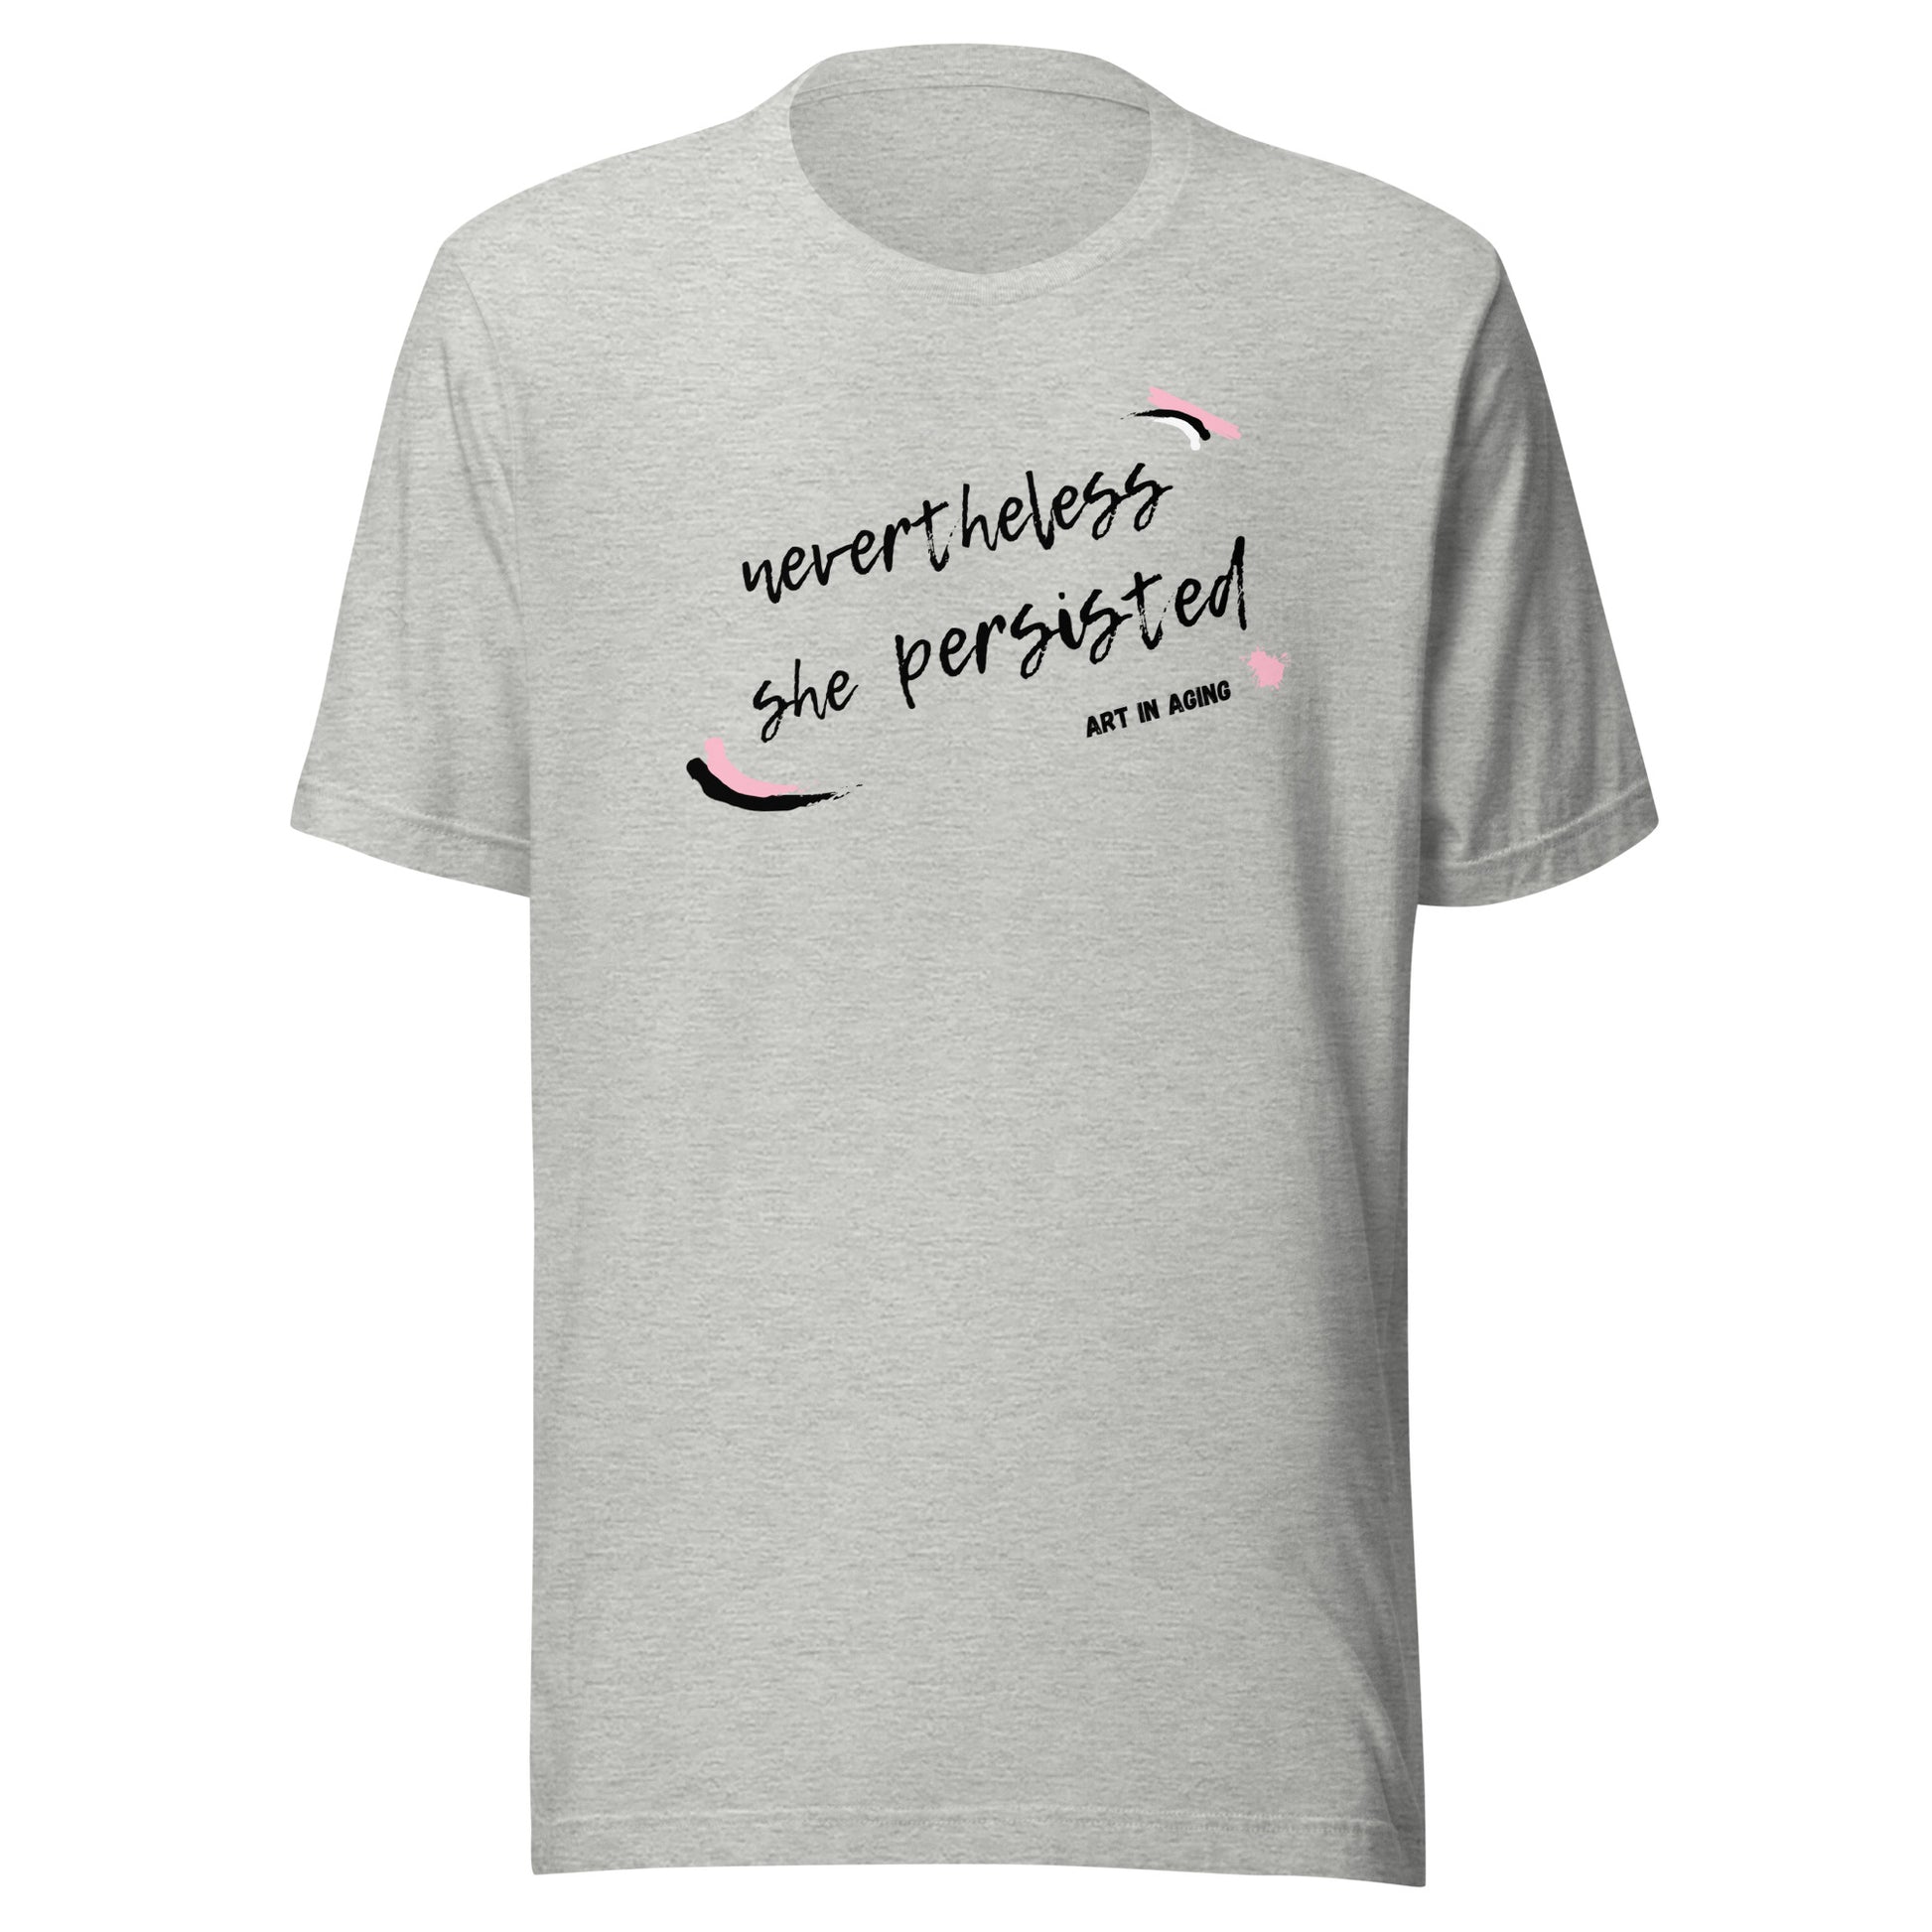 Nevertheless She Persisted T-Shirt | Art in Aging